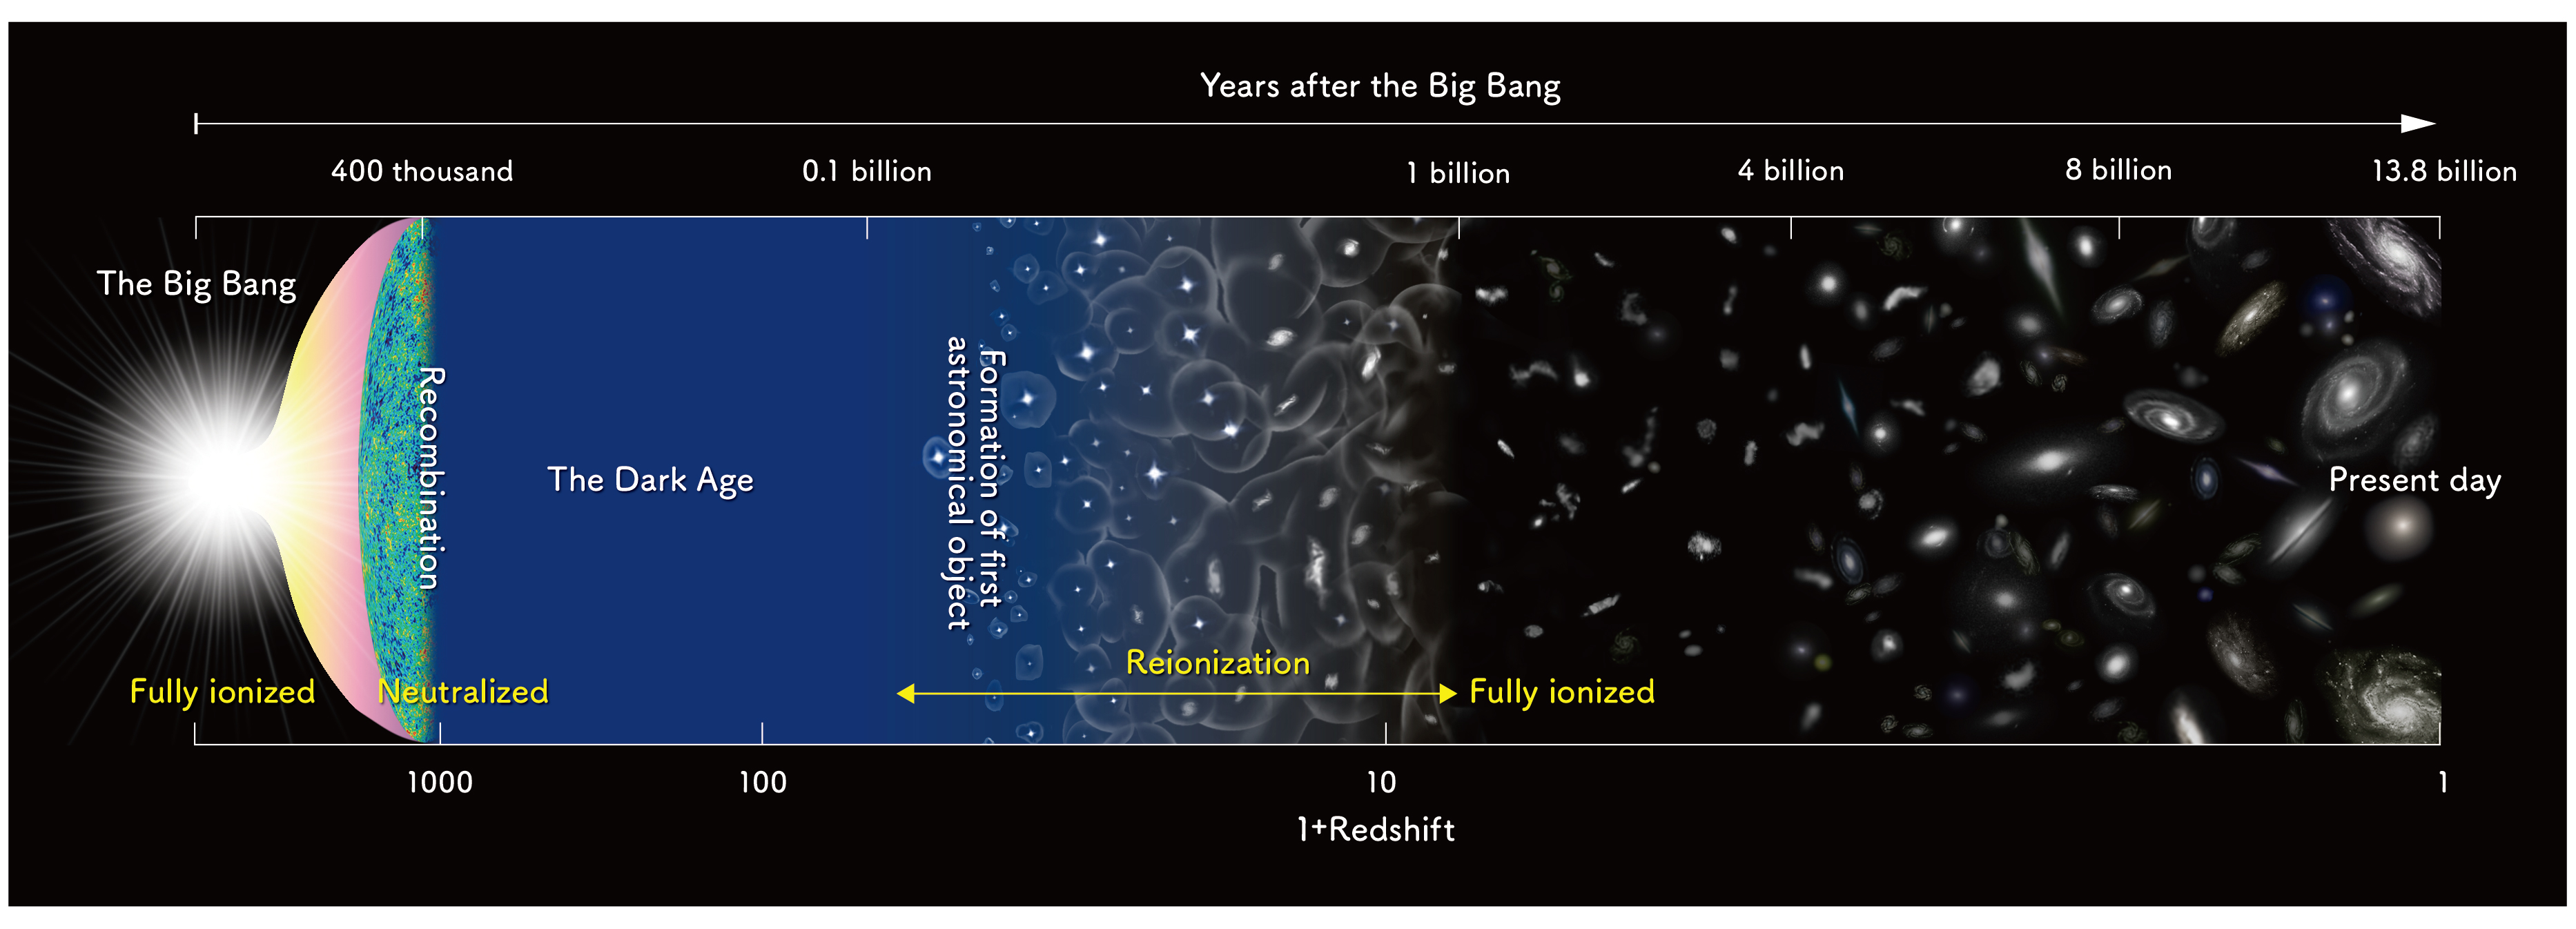 On the left side of this wide image we see the bright white flash of the Big Bang. Along the top is a timeline. On the far right we see the universe as it is today, with spiraling galaxies floating about, evenly dispersed through black space. Along the bottom is the redshift scale, which starts at 1000 at the far right and ends at 1 at the present day. In the center of the diagram we see the phases of the universe: the rapid expansion in yellows and pinks, recombination at next the long Dark Age in deep blue from 400,000 years post Big Bang to 0.1 billion years. Next is the formation of the first astronomical objects, which extends through time to 1 billion years post Big Bang. In this period, the solid blue gives way to translucent irregular blobs with bright spots in their centers. This section is also labeled “reionization.” Where that label becomes “fully ionized” at 1 billion years, we see the first galaxies, which appear as little clusters of white spots. At roughly 4 billion years, the clusters of spots begin to be organized in familiar spirals.